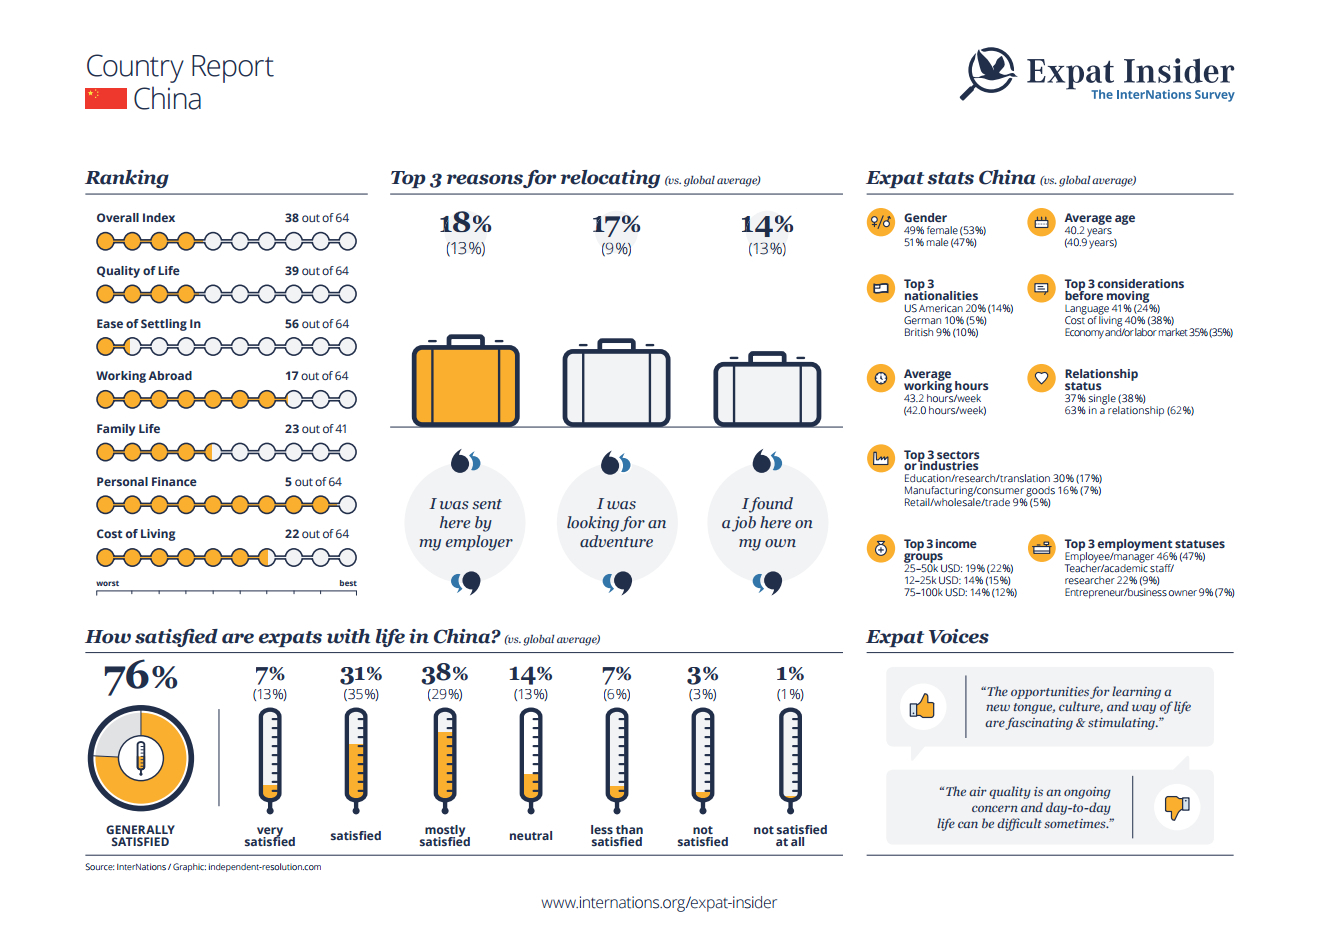 Expat statistics for China - infographic